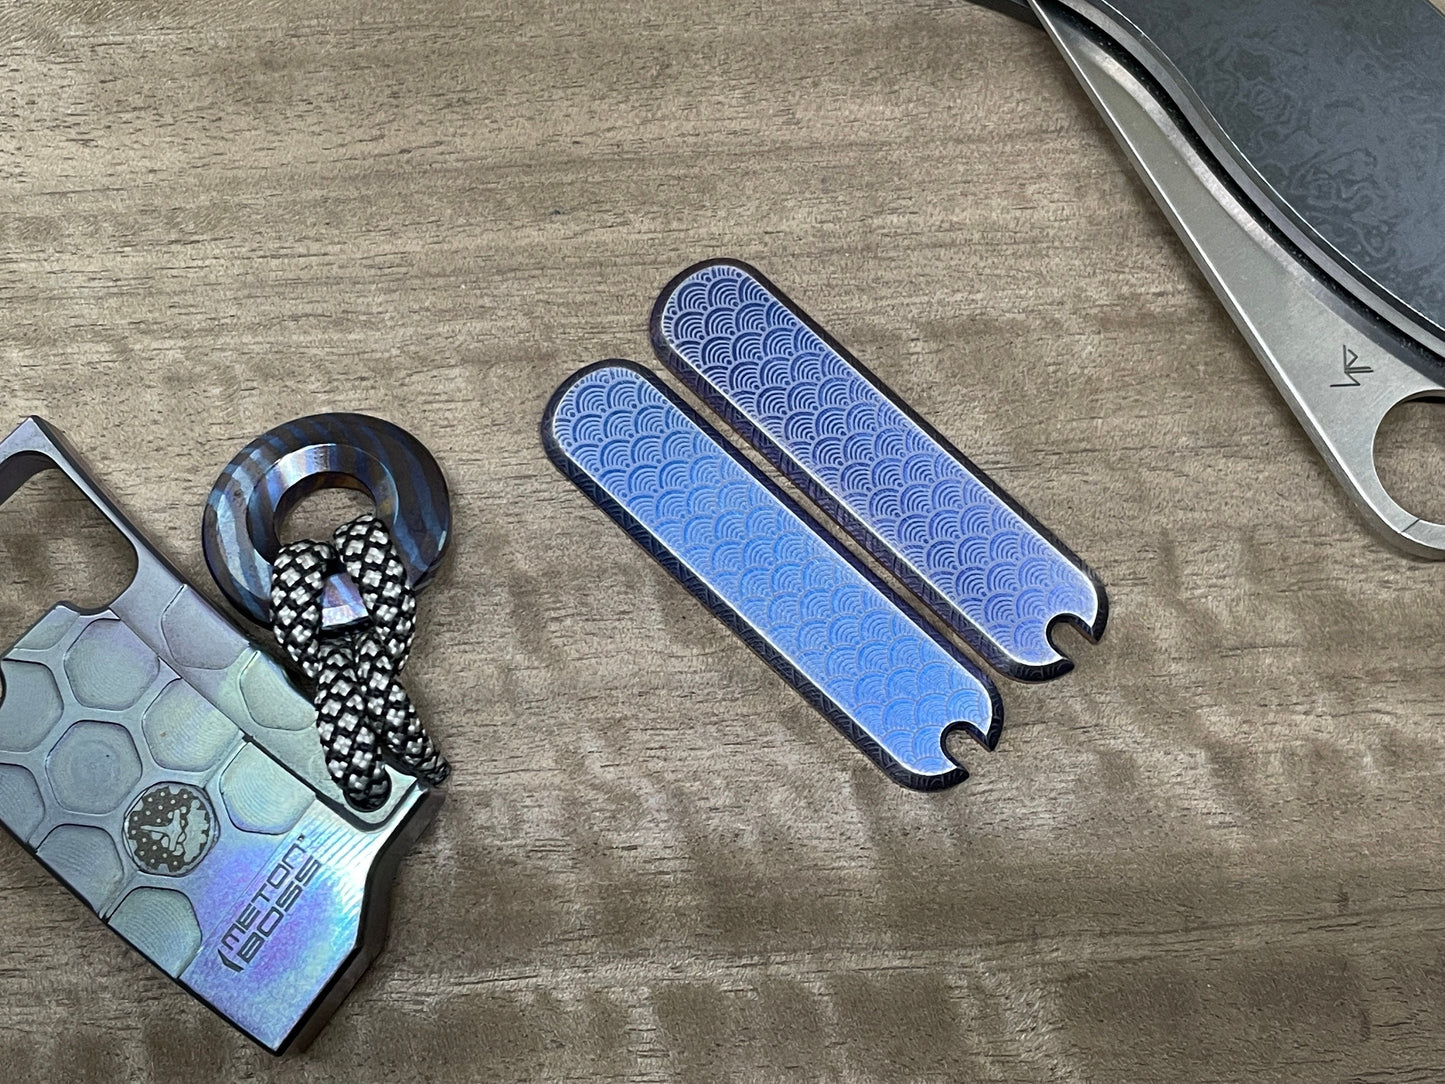 SEIGAIHA Blue ano Brushed 58mm Titanium Scales for Swiss Army SAK